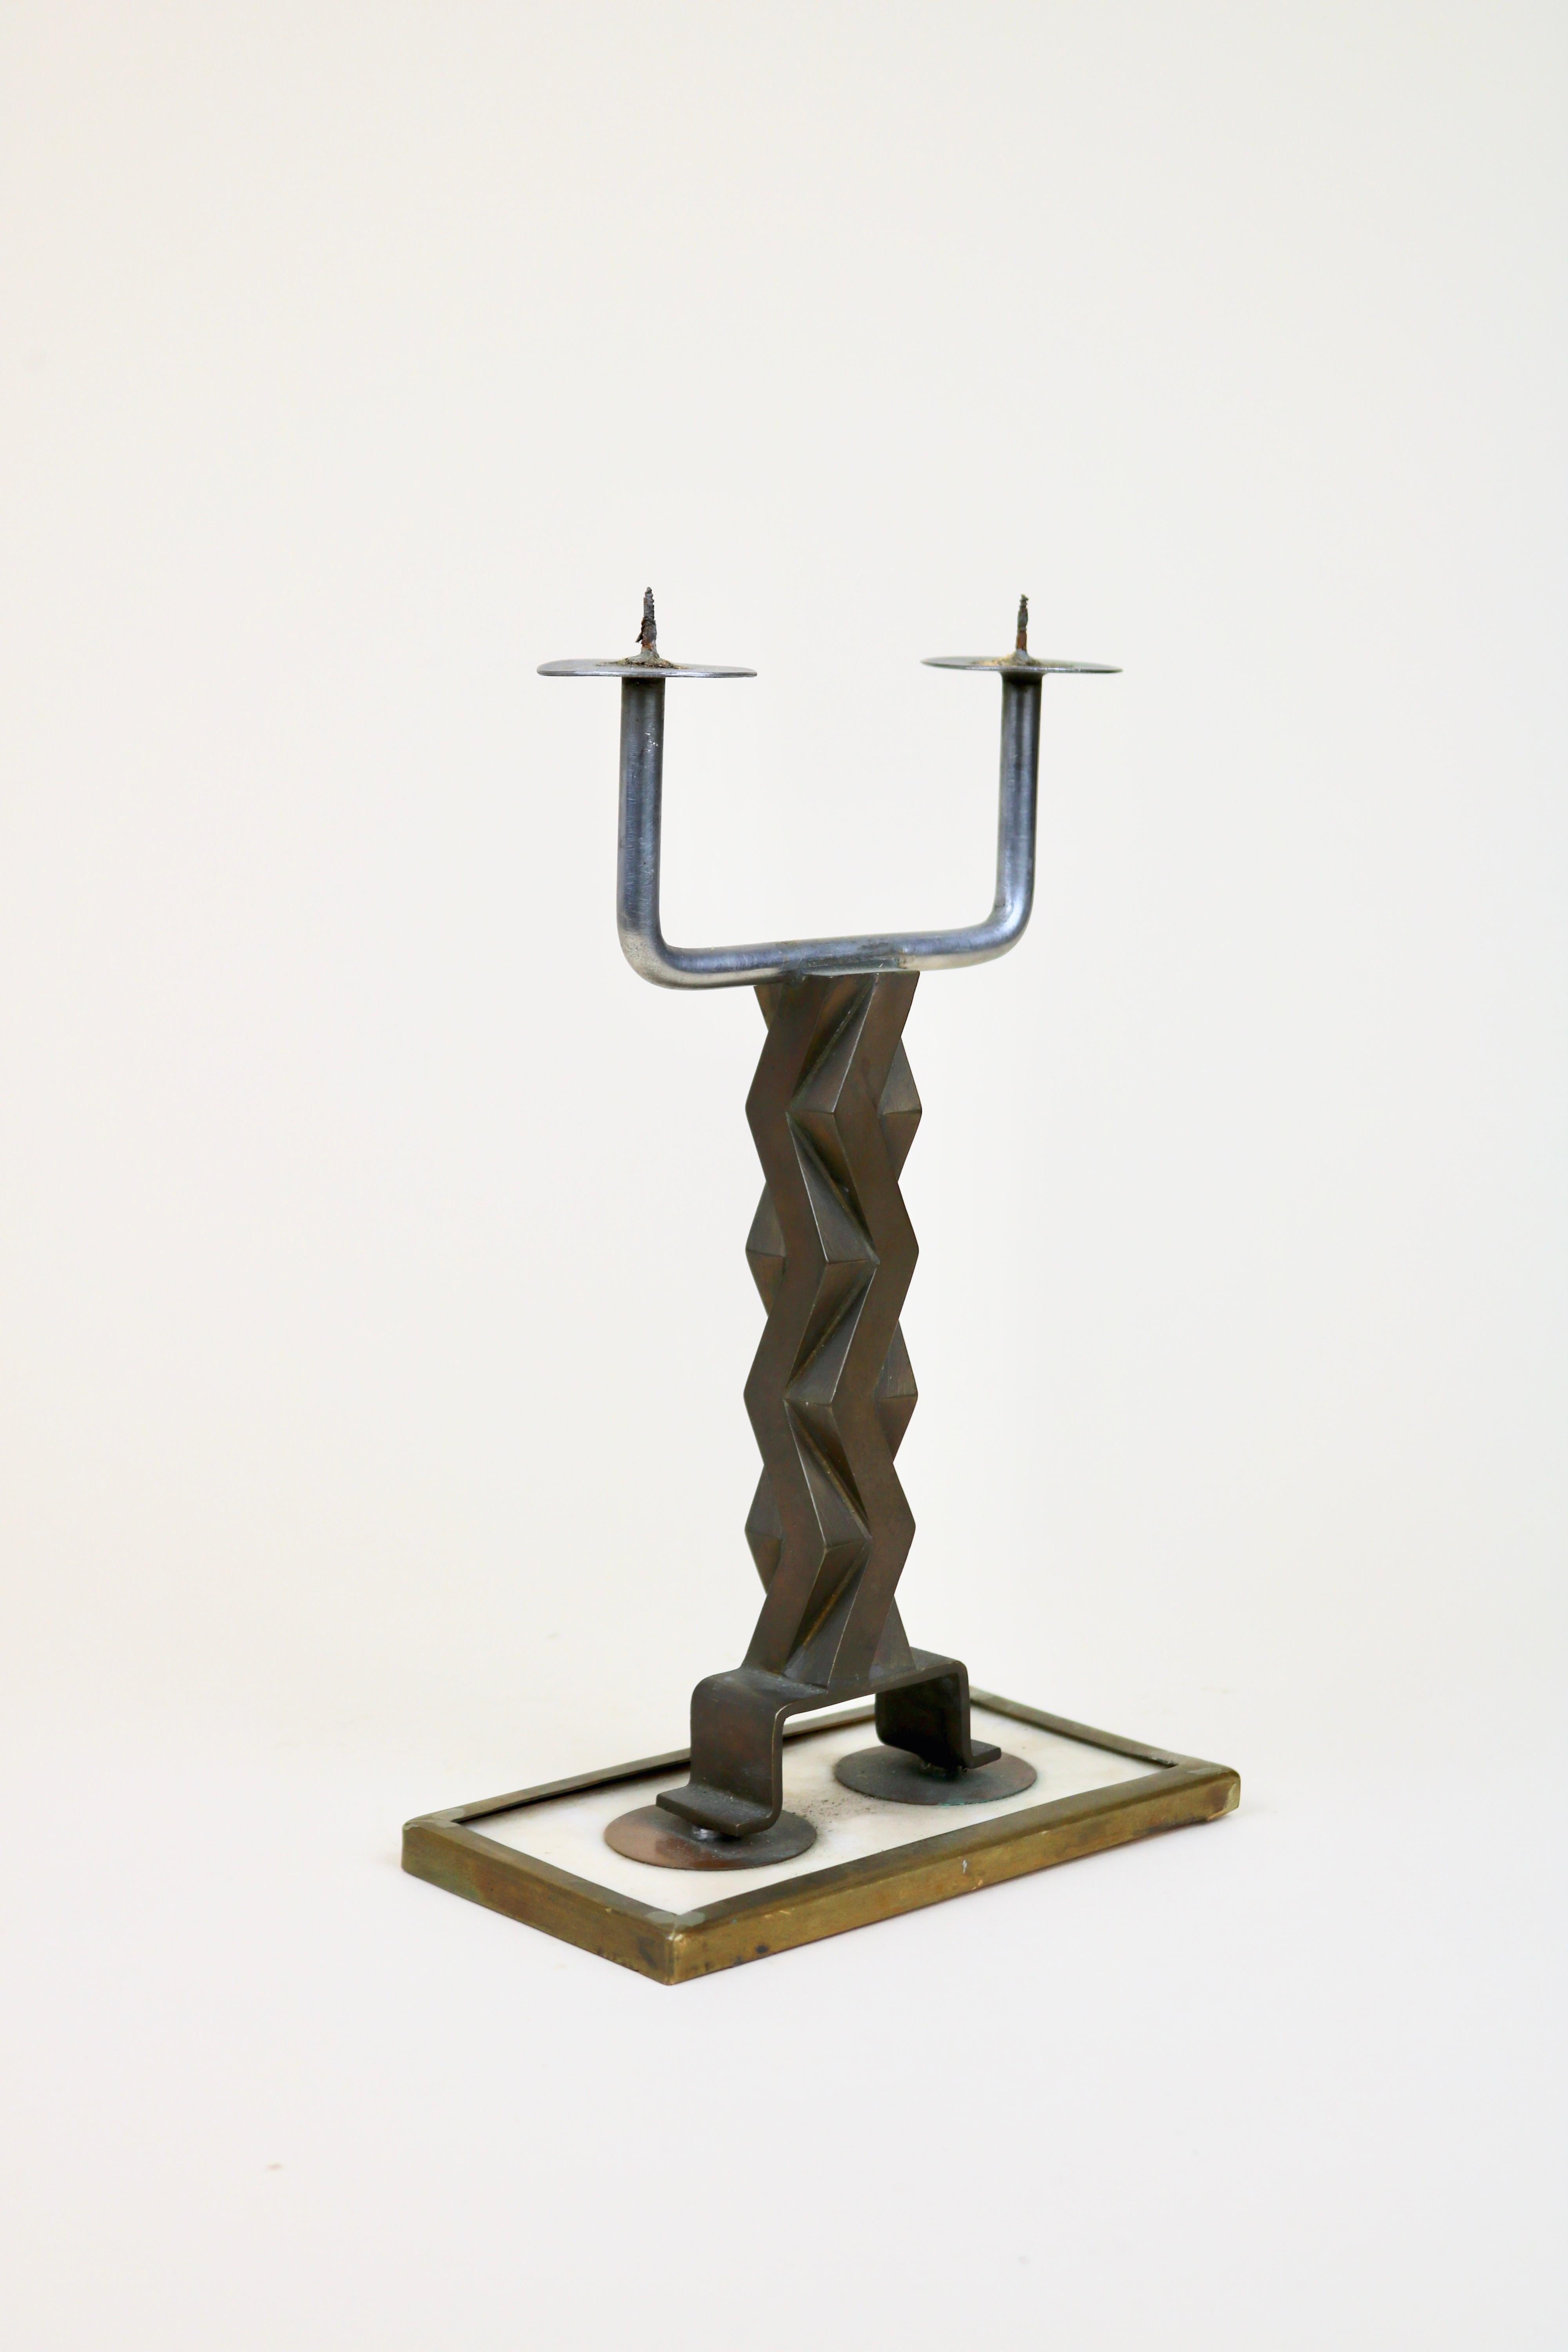 Brutalist candelabra pair made by a French craftsman.
A zig-zag bronze body, similar is seen in French Design of the 50s and 60s. Set on a framed alabaster base.


.